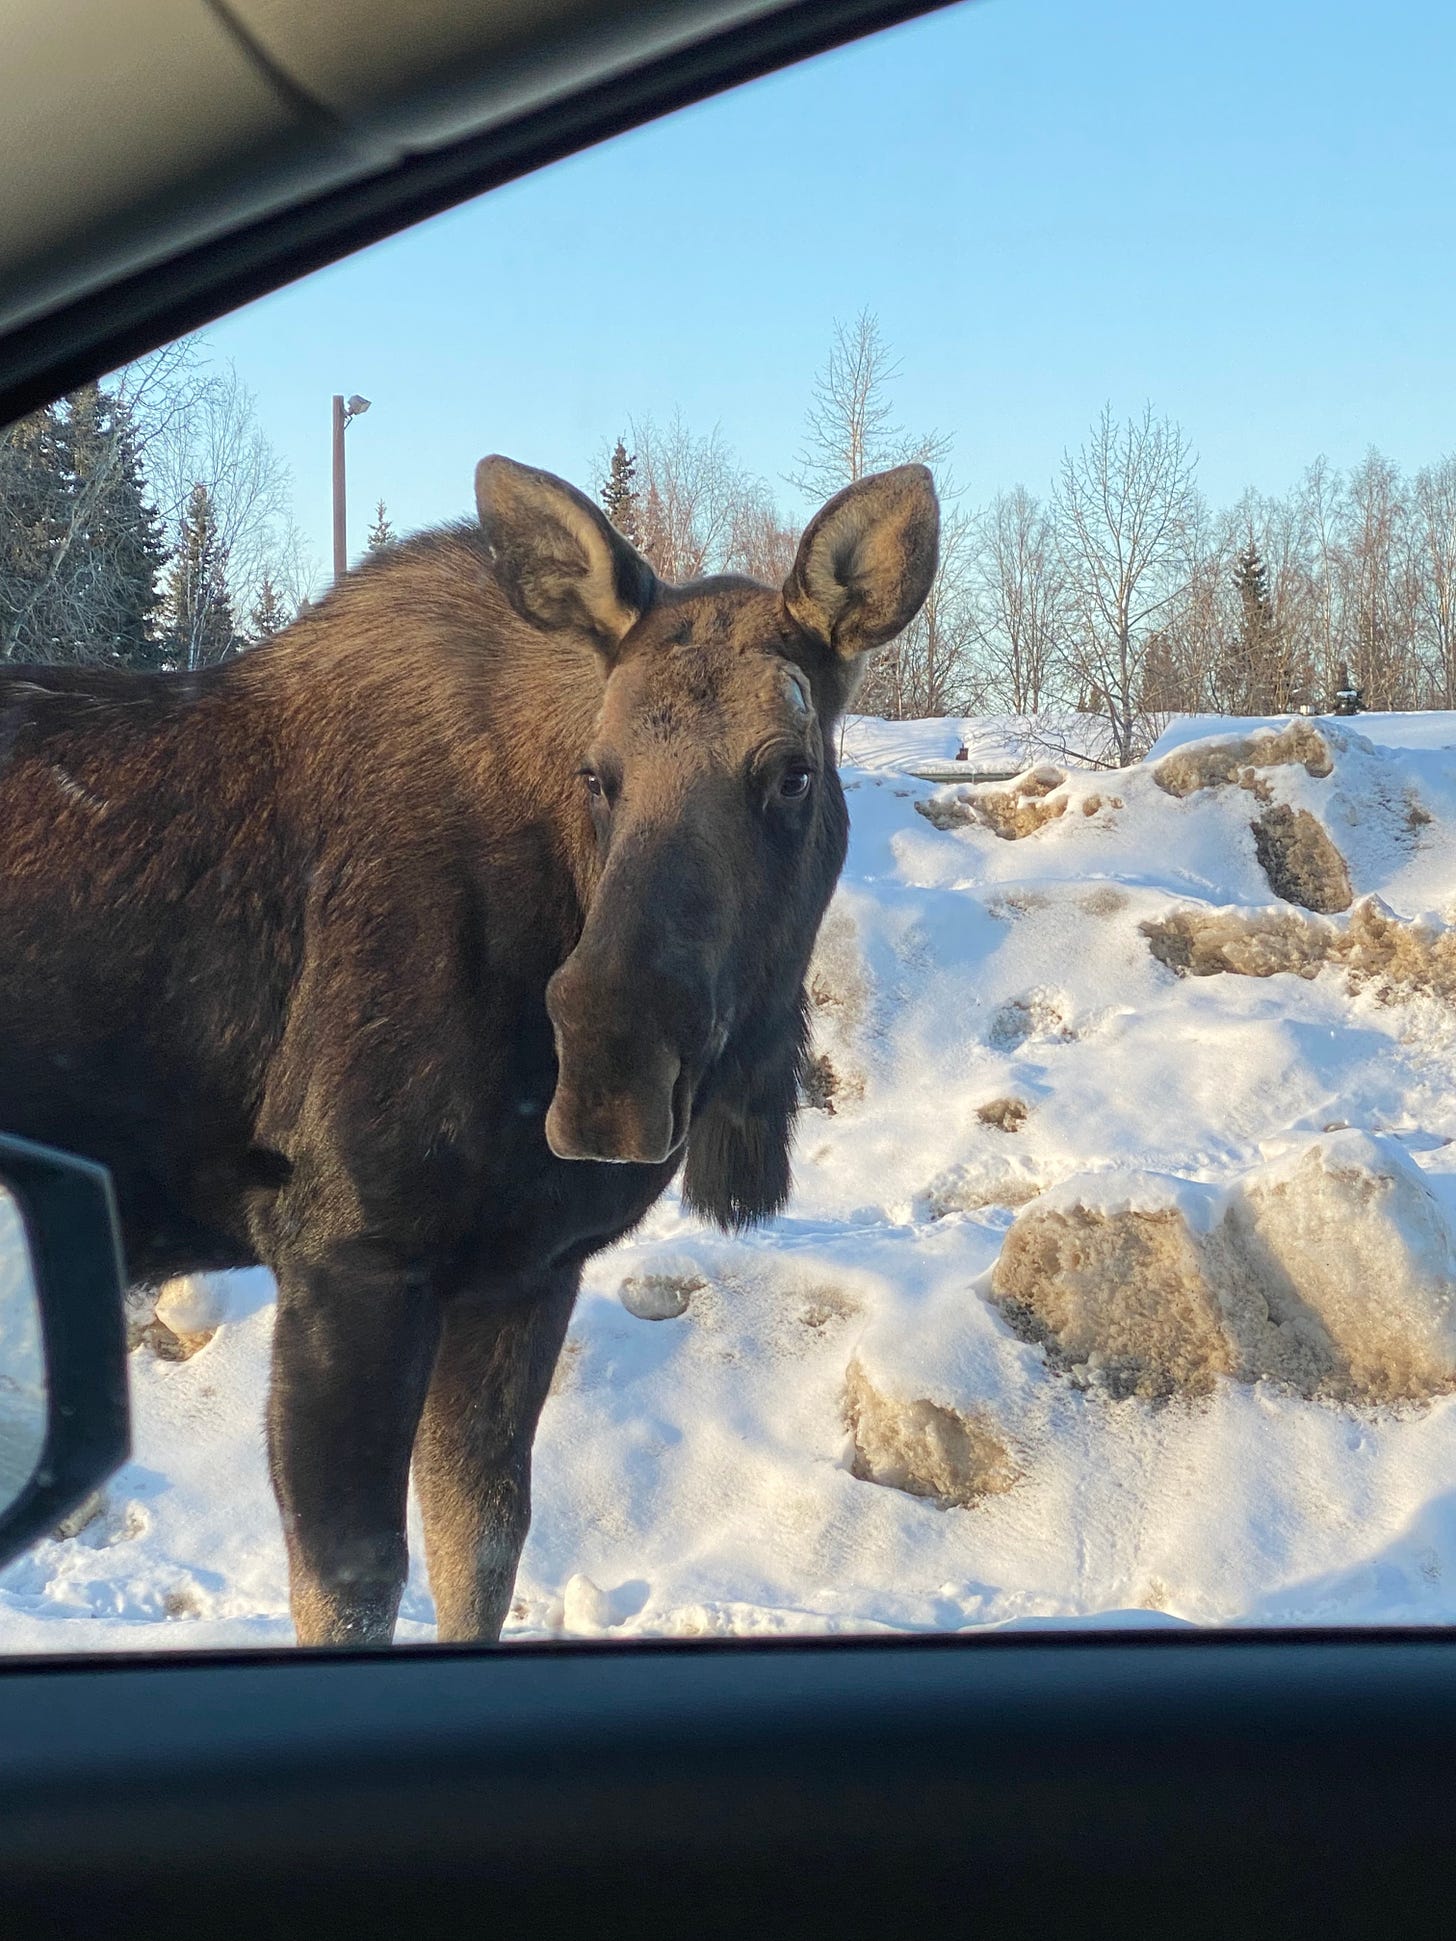 This  is not a dog. This is a moose. 